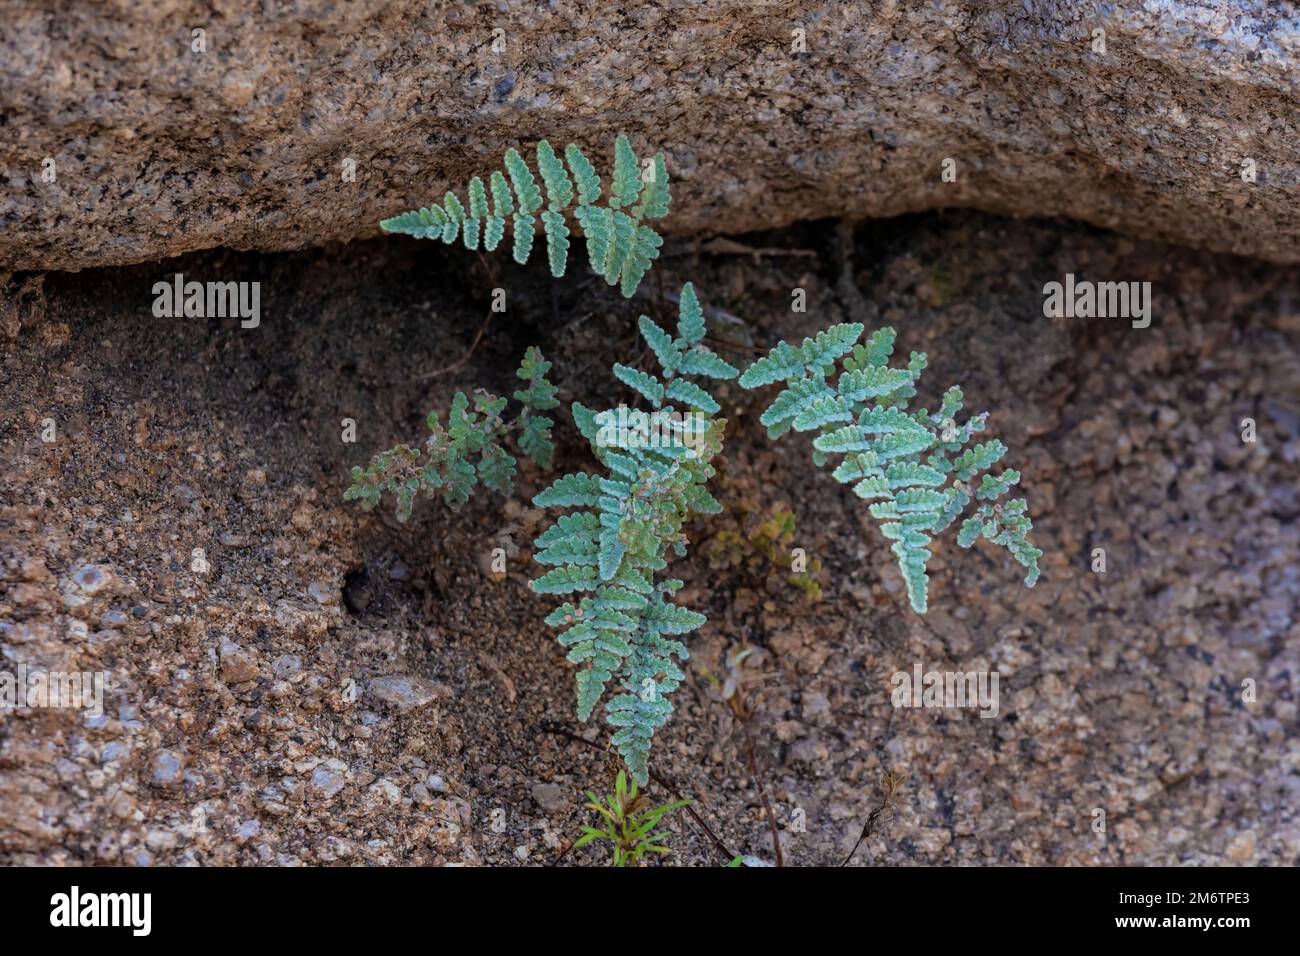 Eaton's Lipfern, Myrioptersis rufa (unconfirmed) at Aguirre Spring Campground in Organ Mountains-Desert Peaks National Monument, New Mexico, USA Stock Photo